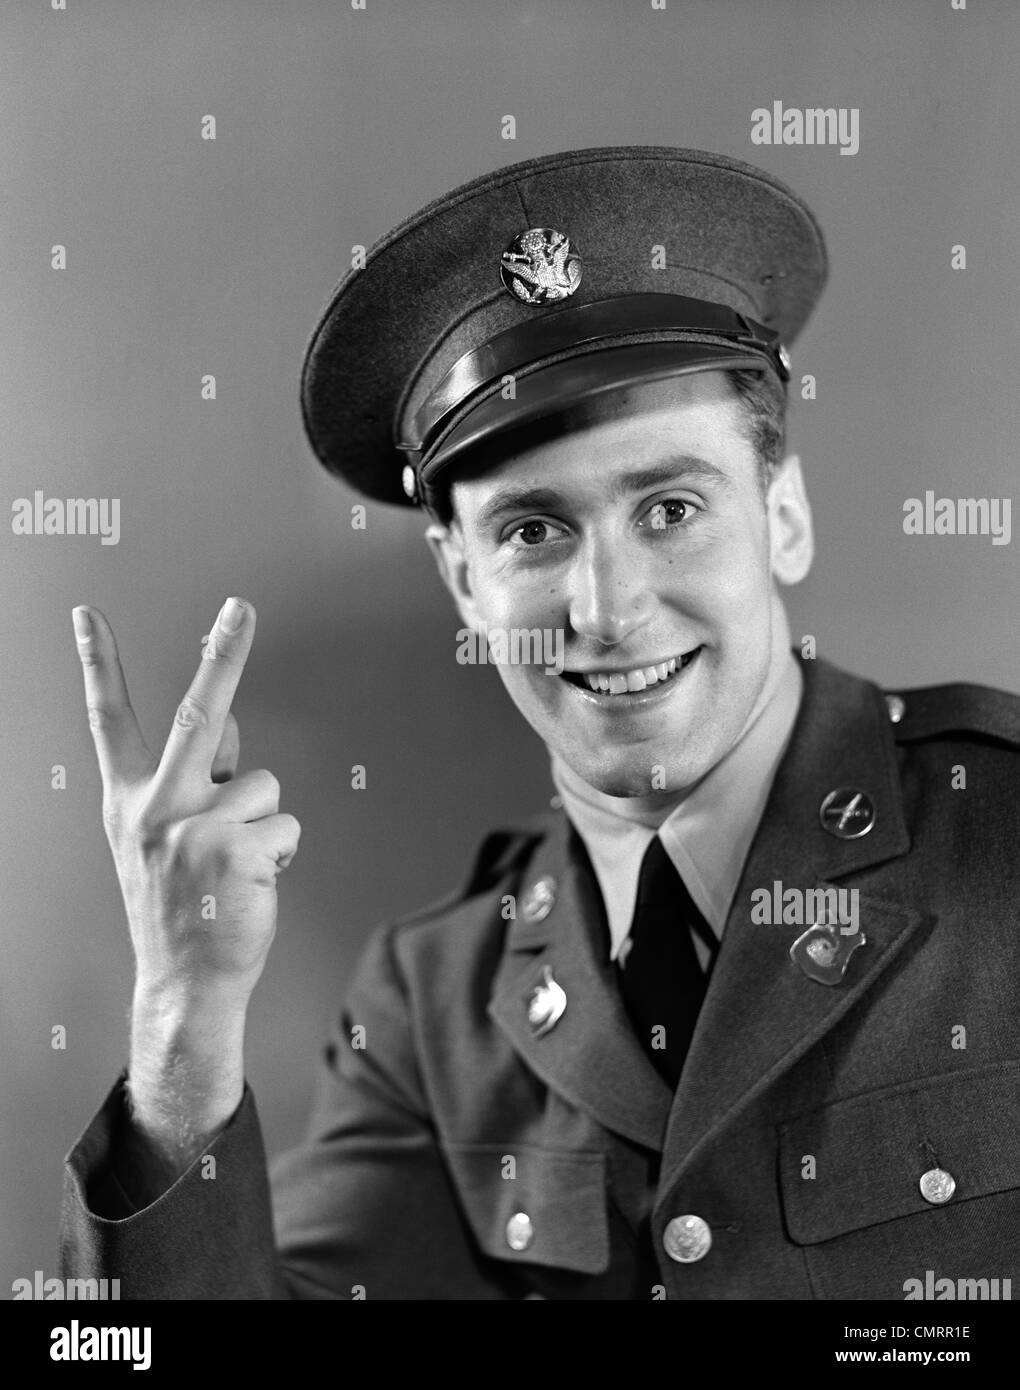 1940s PORTRAIT OF YOUNG ARMY MAN IN UNIFORM SMILING & MAKING VICTORY SIGN WITH HAND Stock Photo